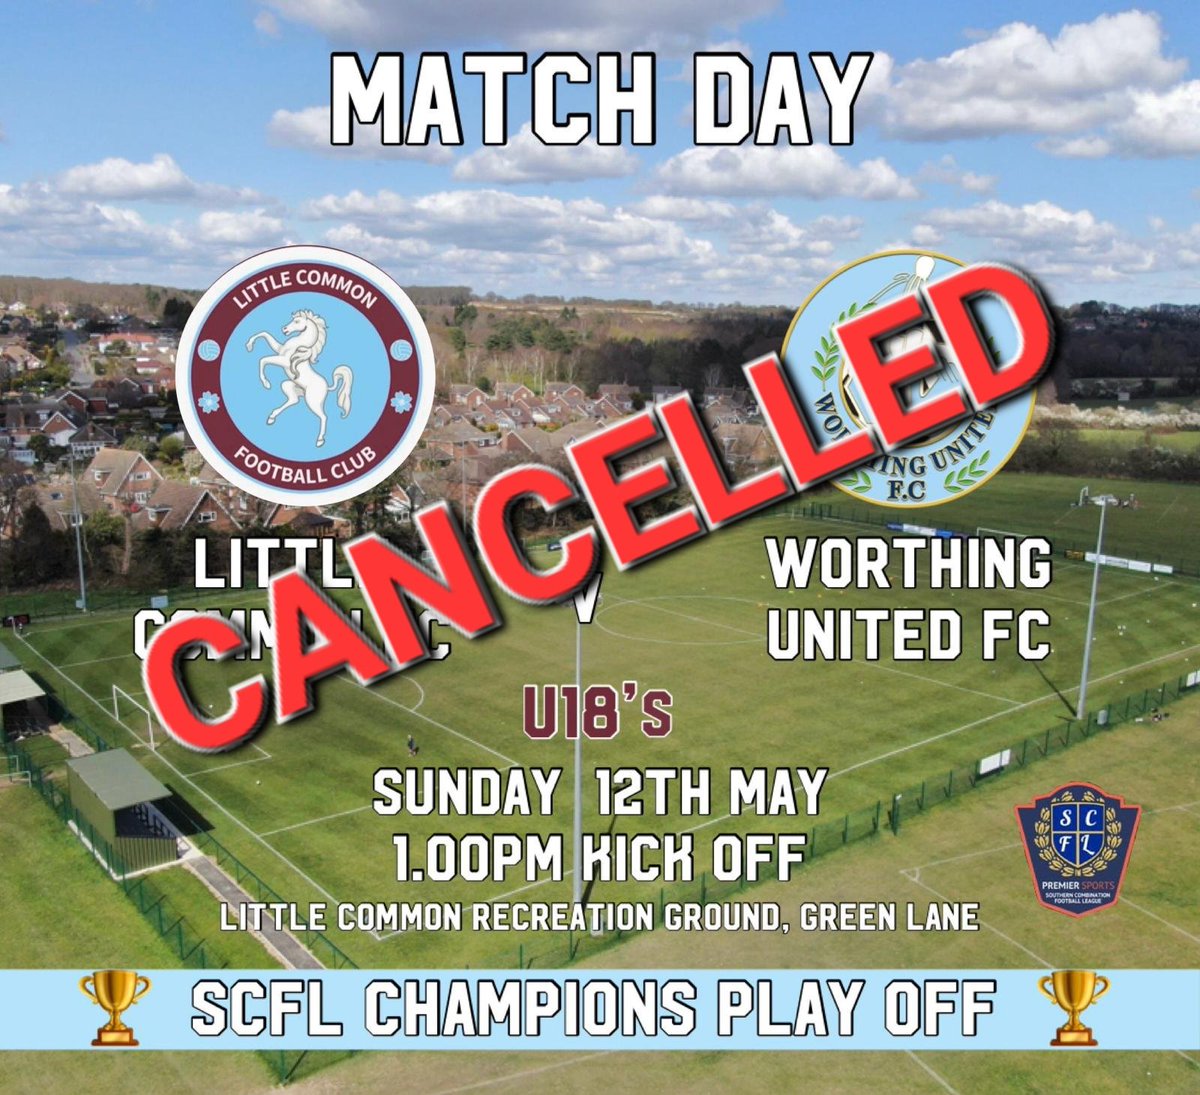 Unfortunately, our U18 fixture has been cancelled tomorrow due to issues with the North Division championship and an appeal to the FA. The champions play off will not be completed this season.